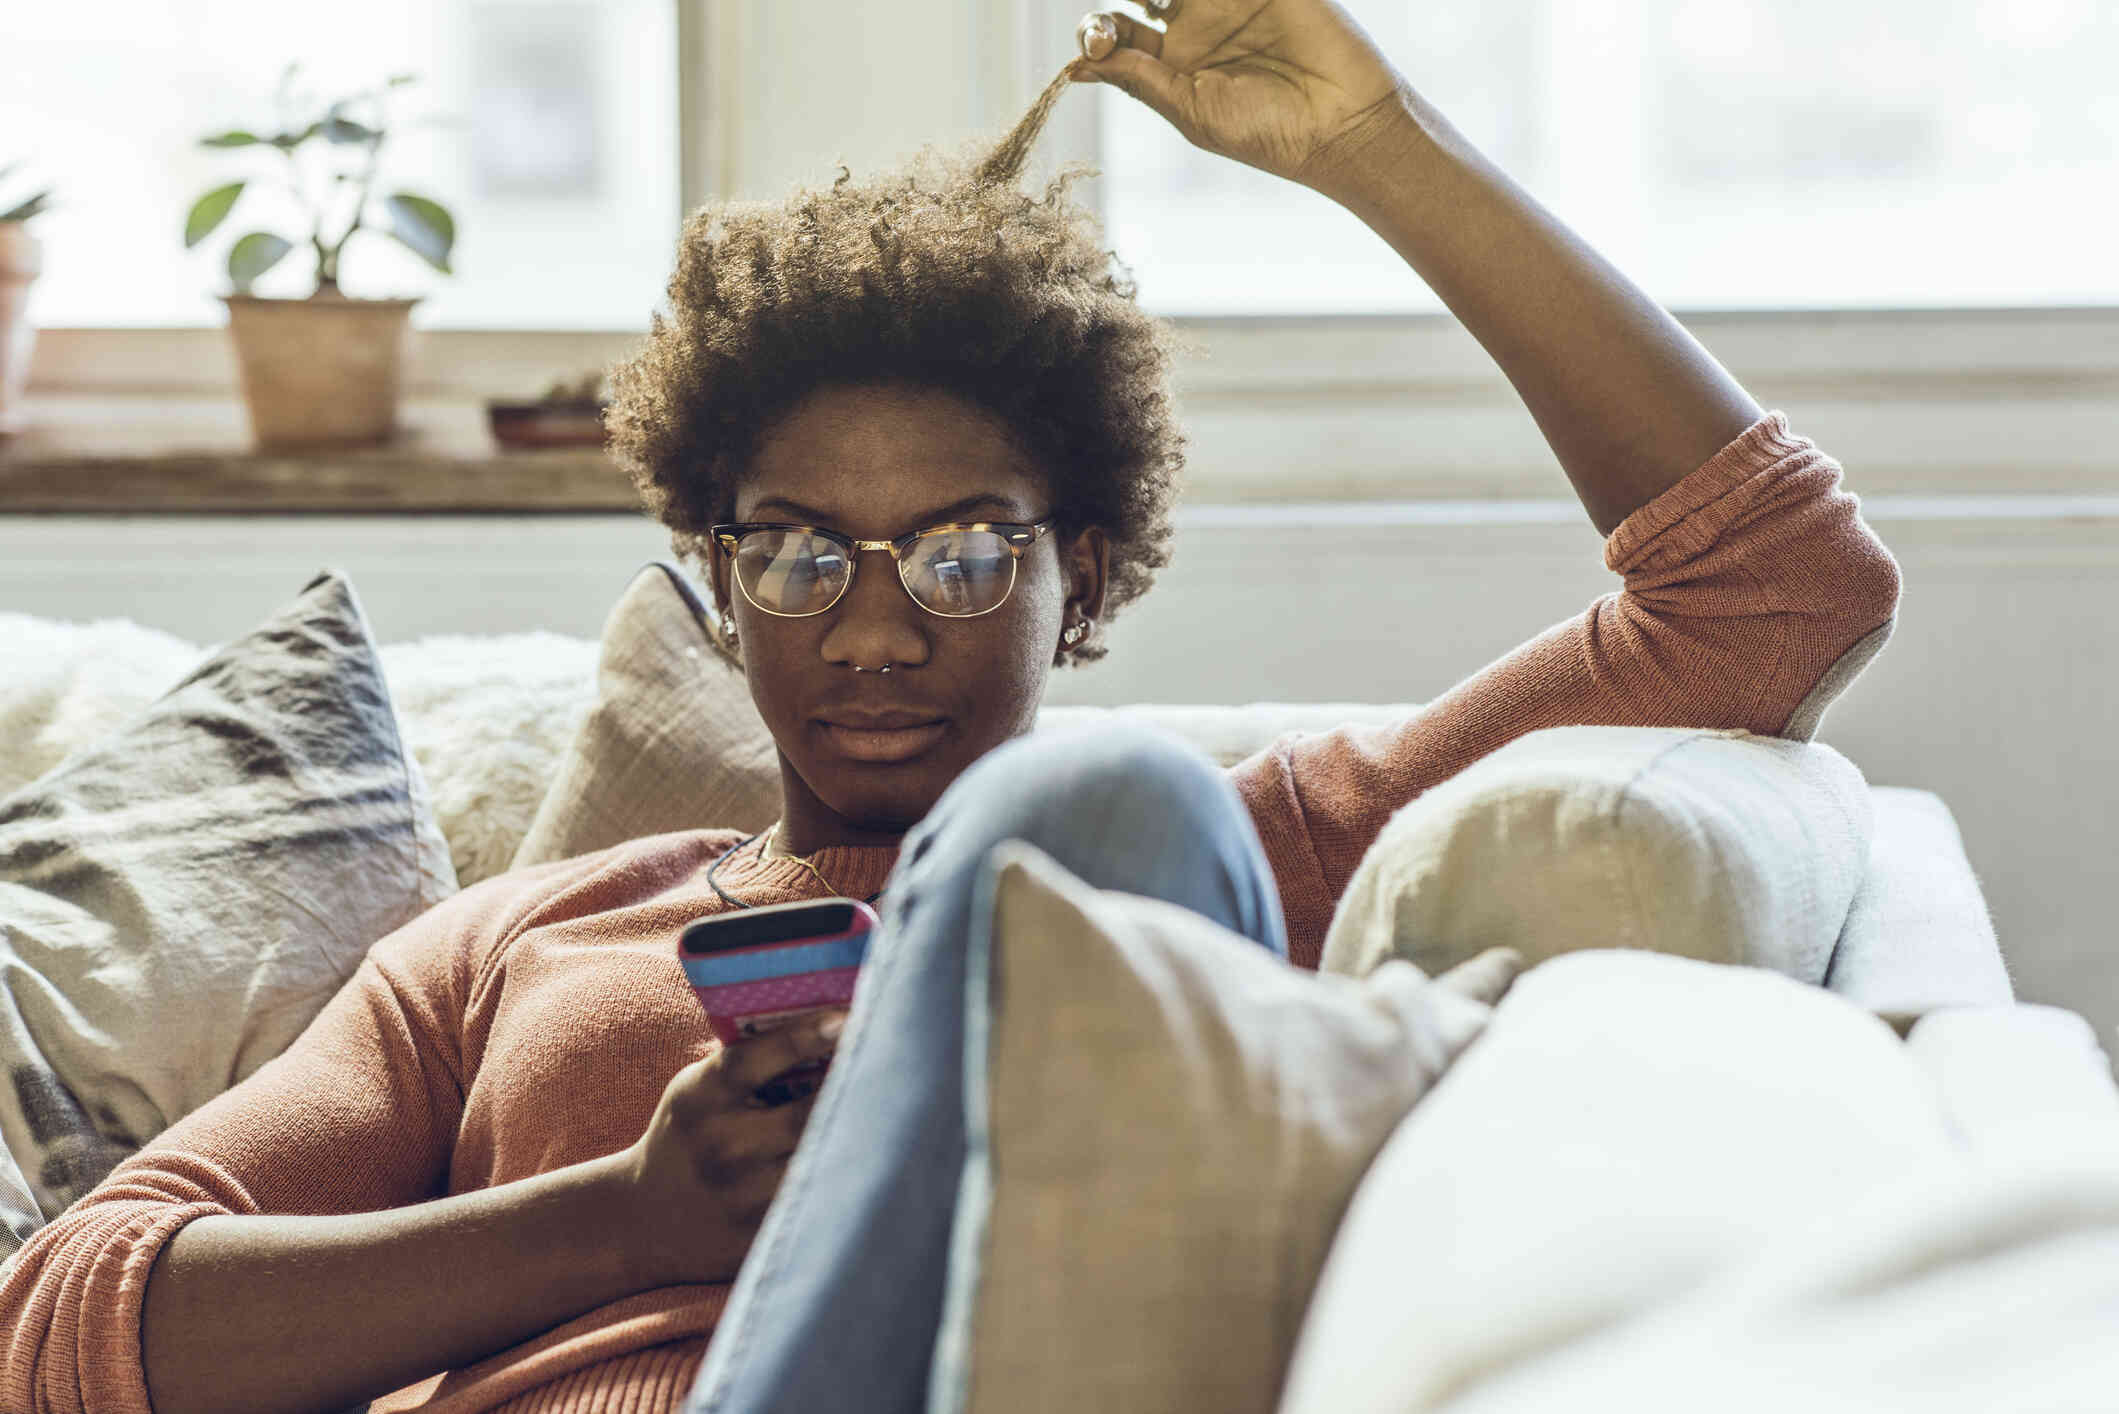 A woman with glasses sits casually on her couch and plays with her hair while looking at the cellphone in her hand.